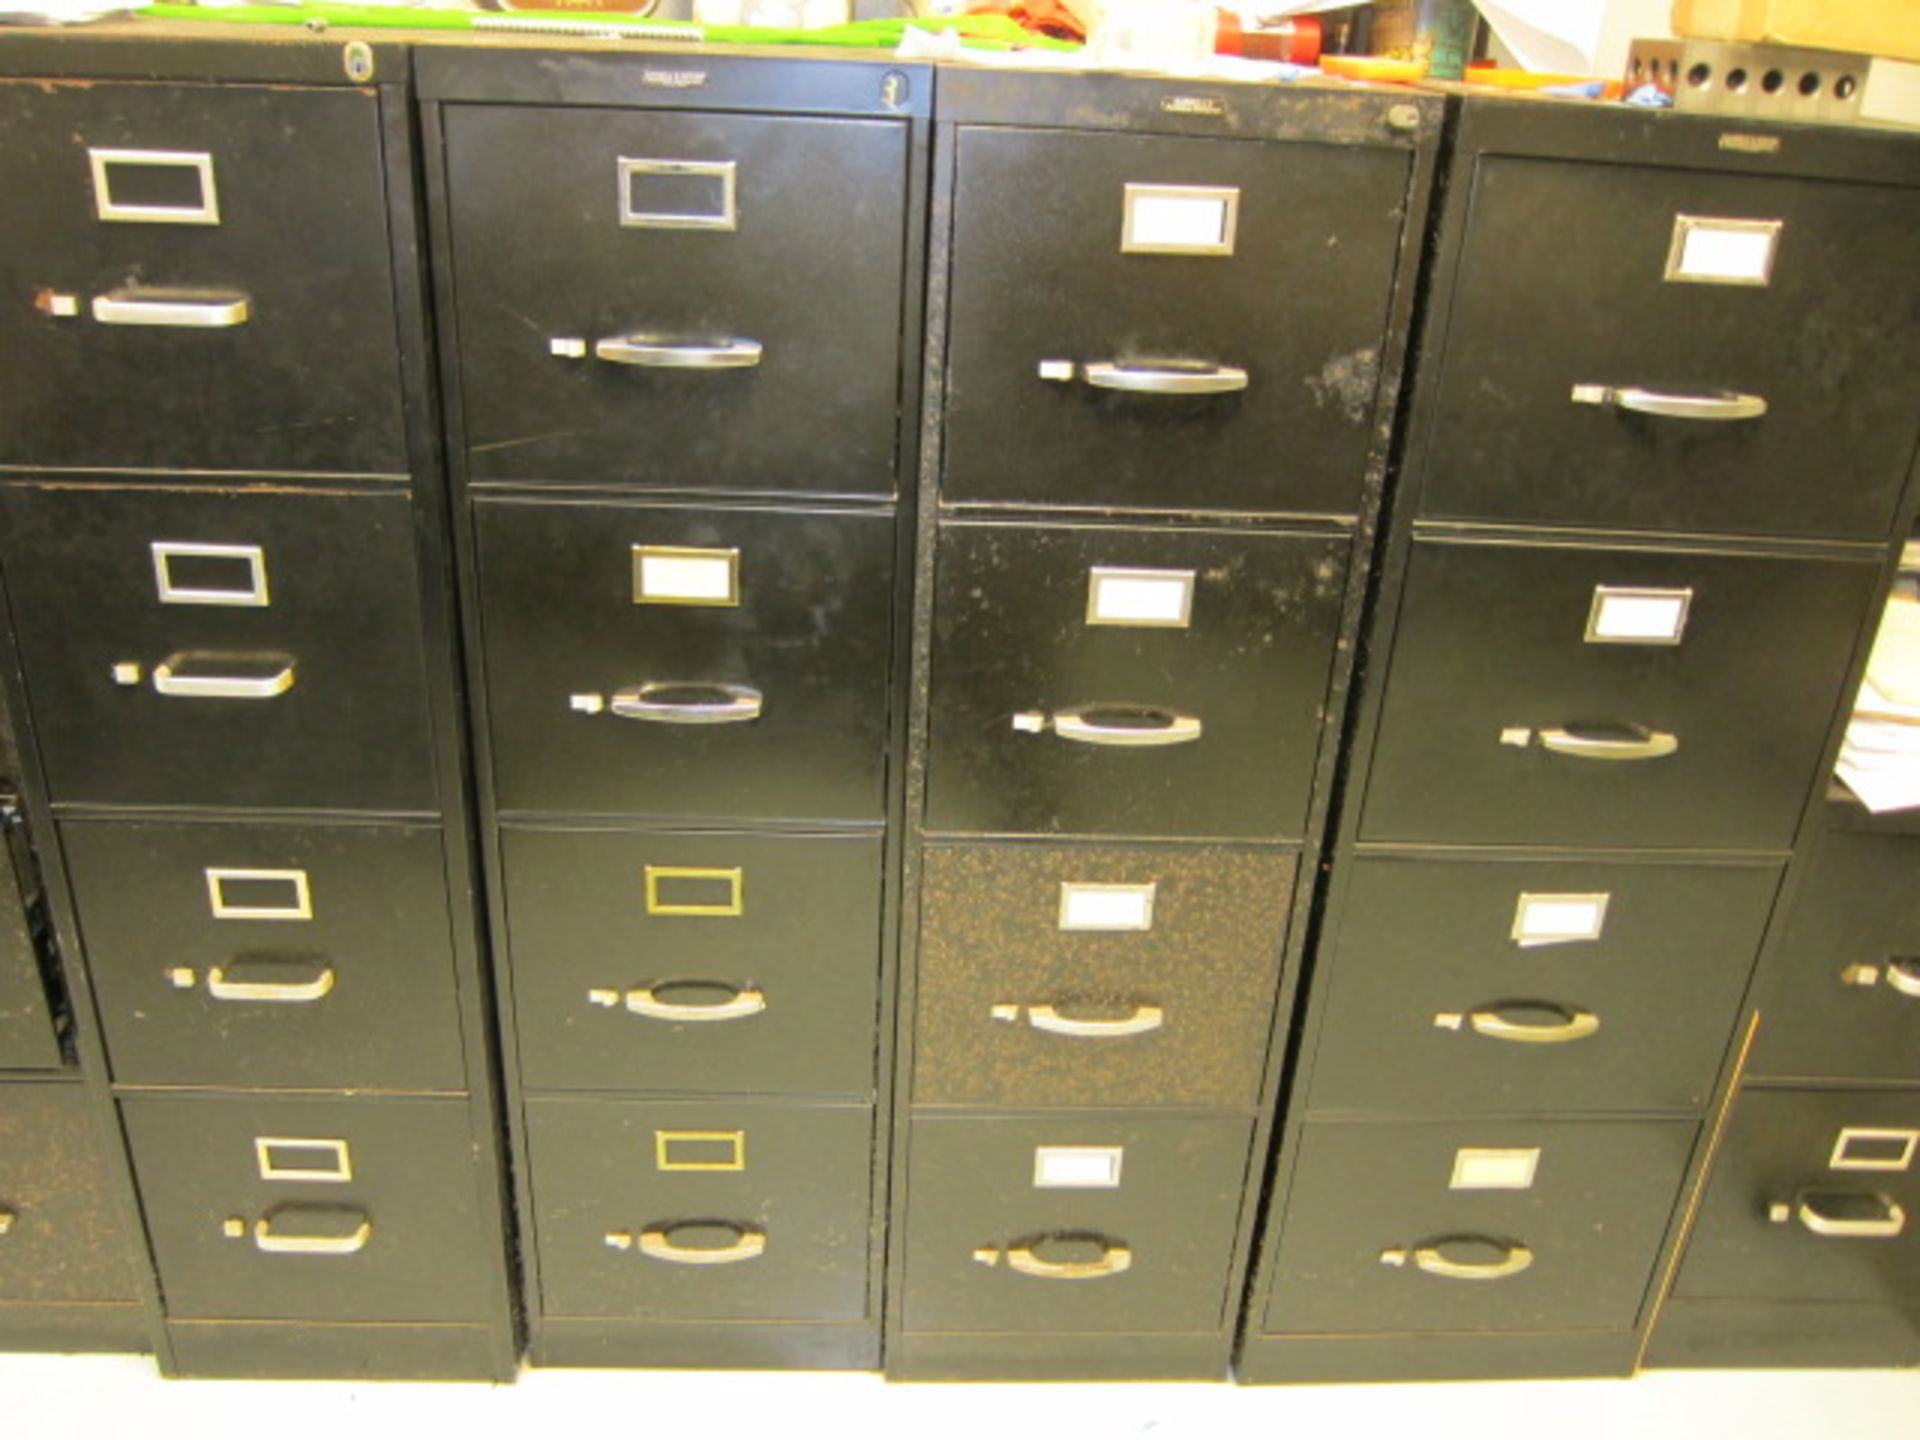 LOT CONSISTING OF: workbench, table, steel shelf, assorted file cabinets (7) - Image 4 of 4